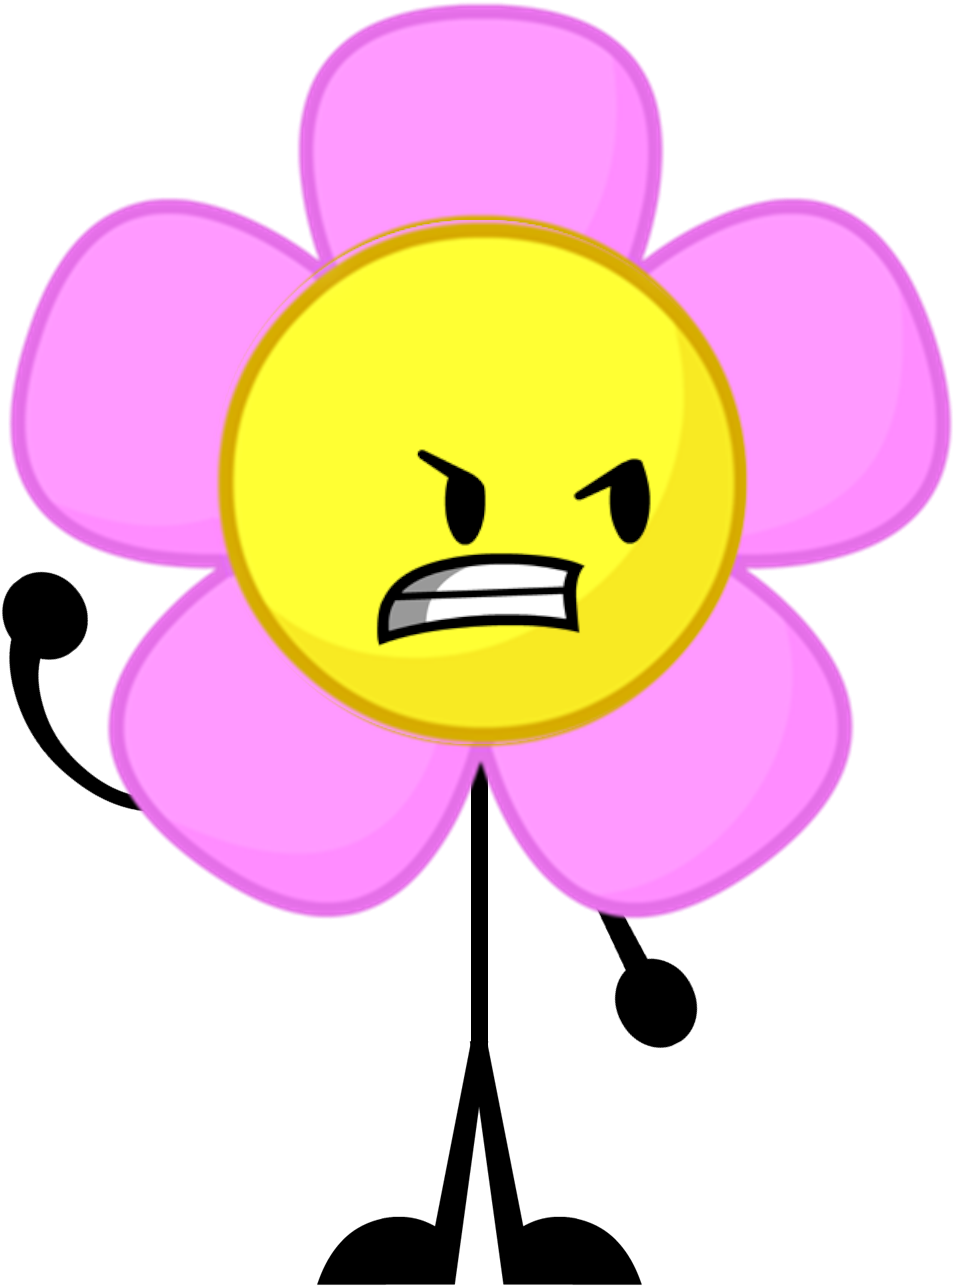 Download Bfdi Flower - Bfdi Flower Png PNG Image with No Background ...